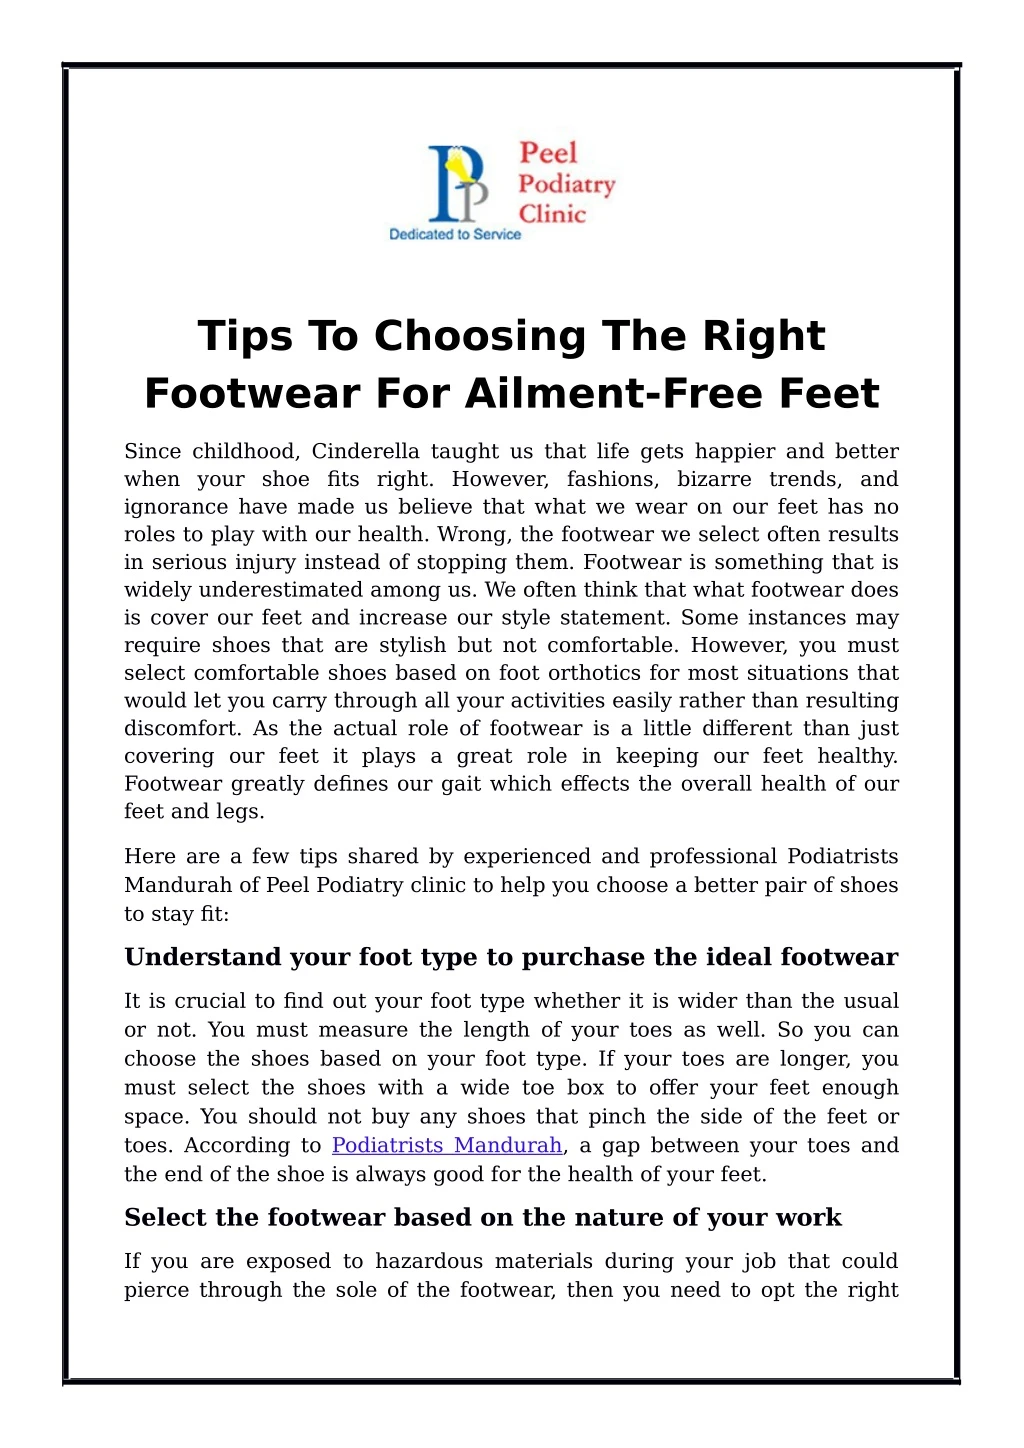 tips to choosing the right footwear for ailment